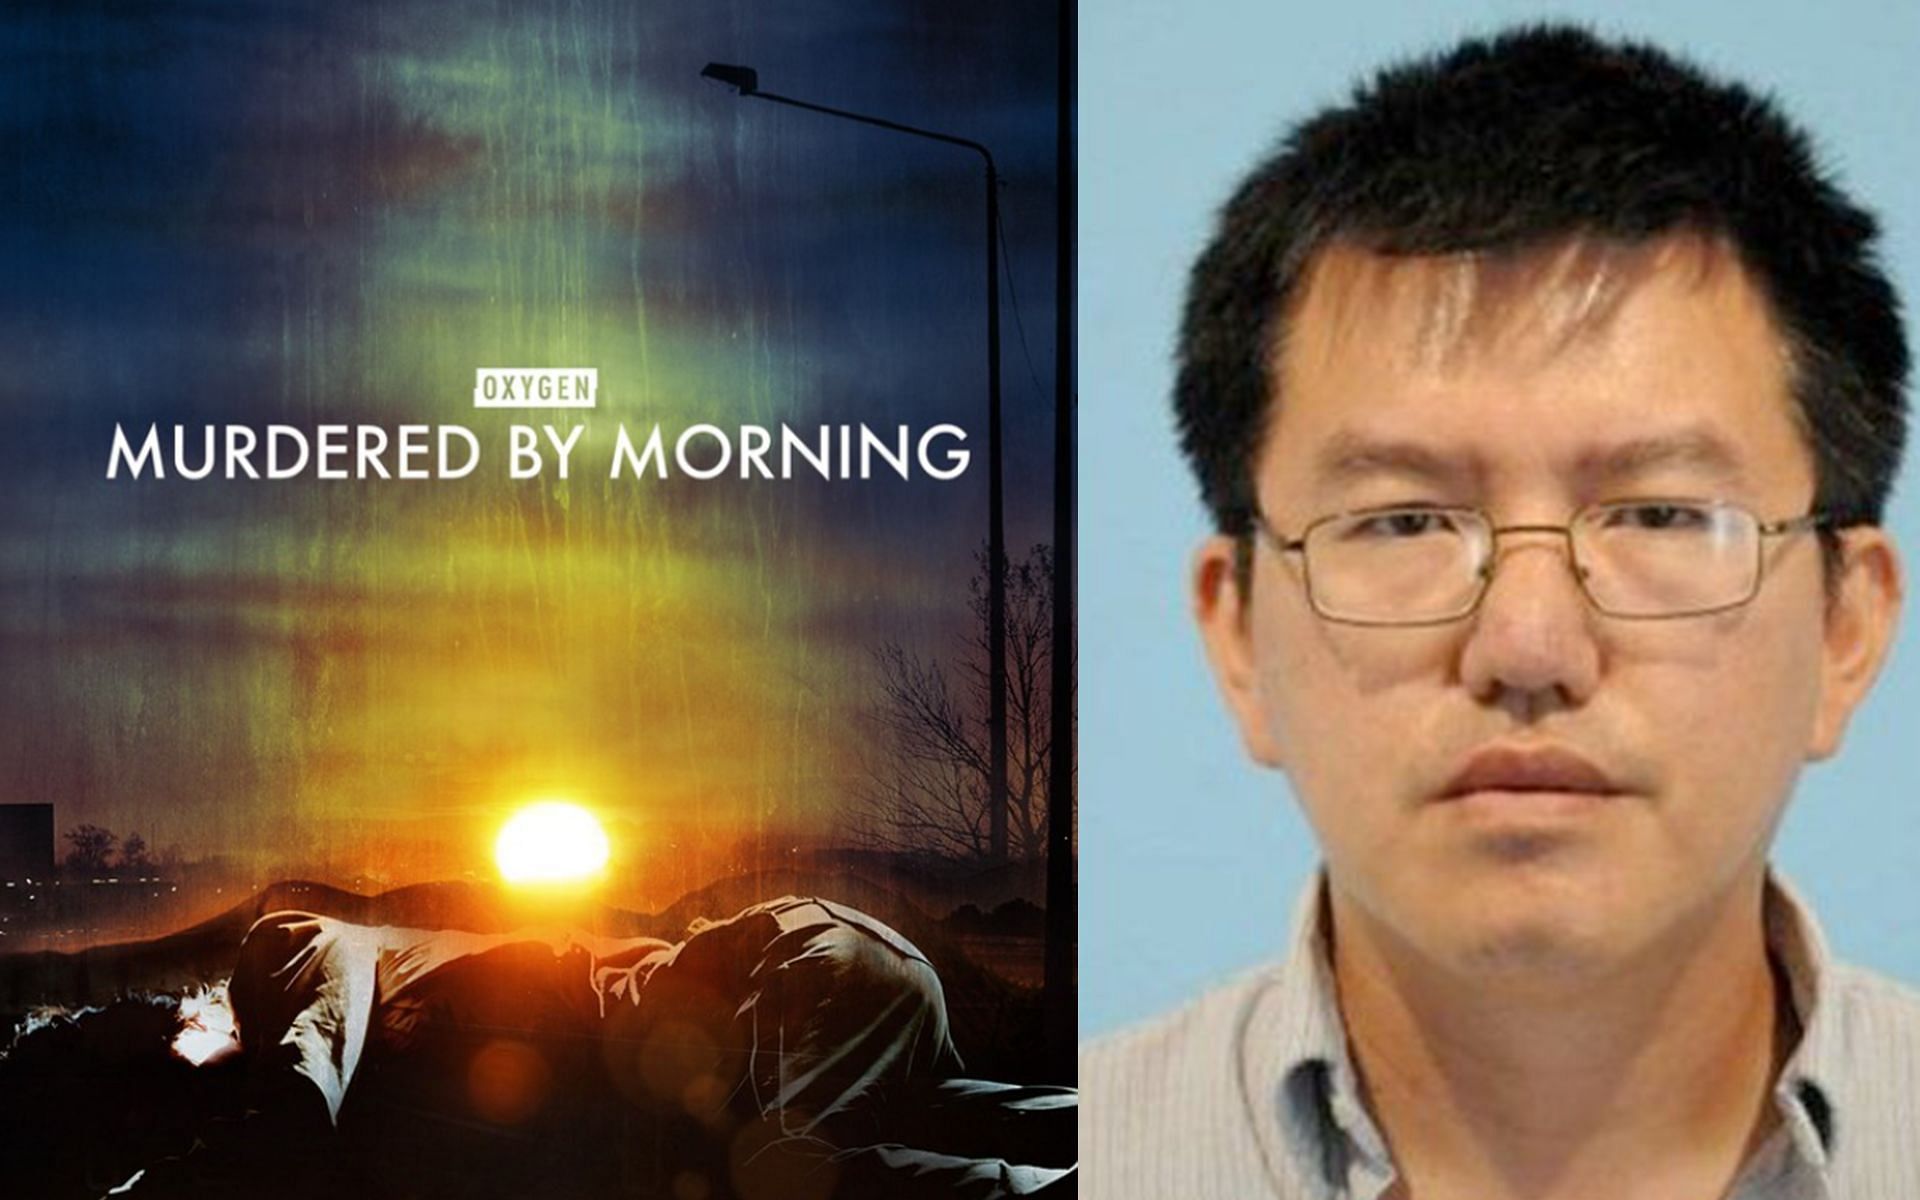 The latest episode of Murdered by Morning will focus on Dane William&#039;s killer. (Image via IMDb &amp; Facebook) Dane William&#039;s murderer Philong Huynh was sentenced to lifetime imprisonment with no chances of parole. (Image via Oxygen)